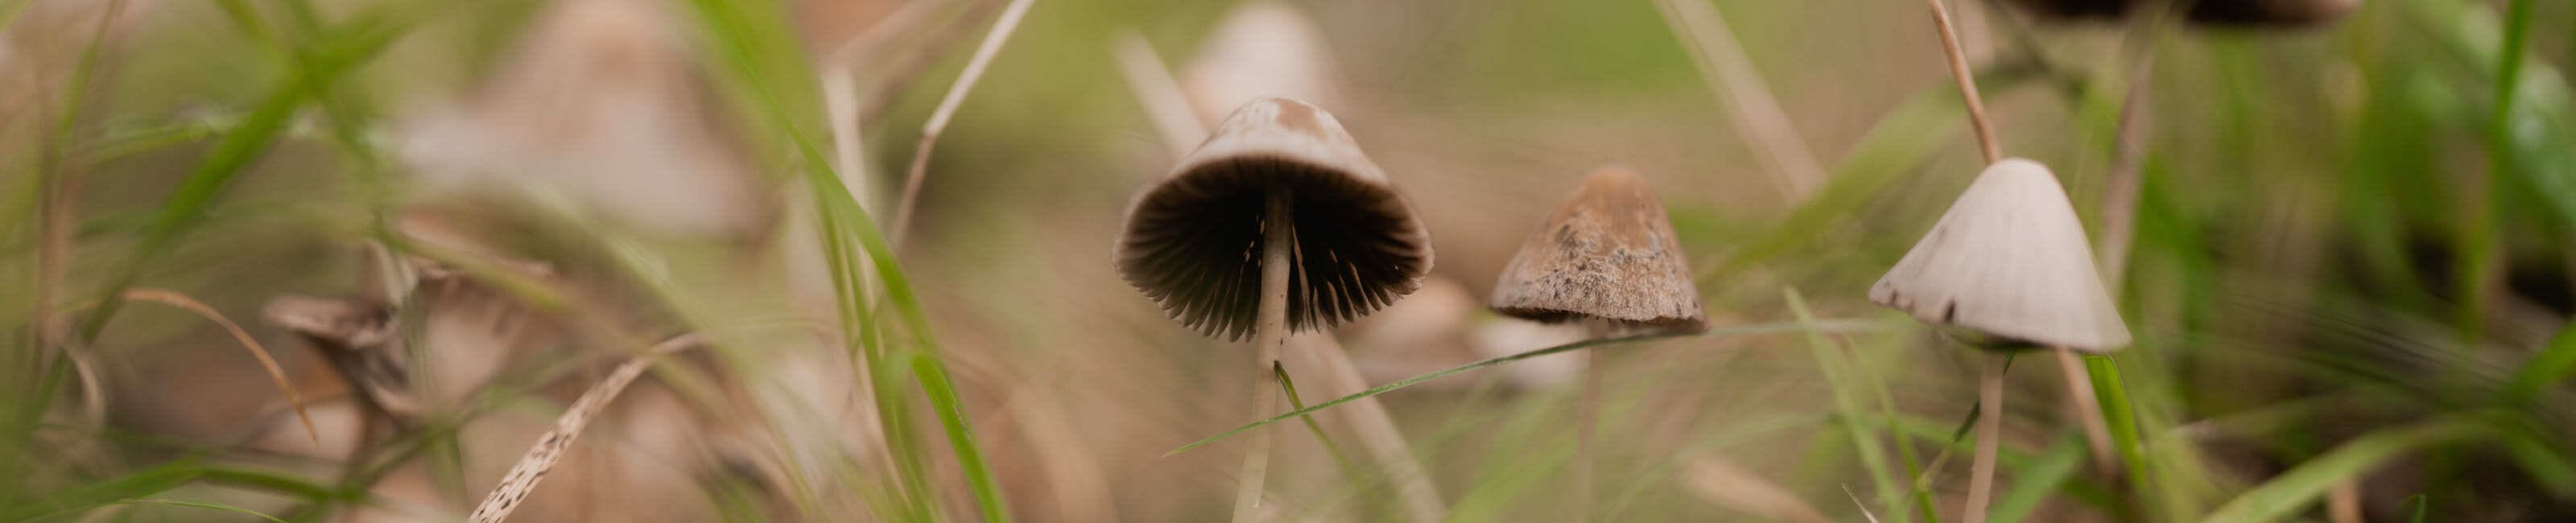 close up of small mushrooms in grass